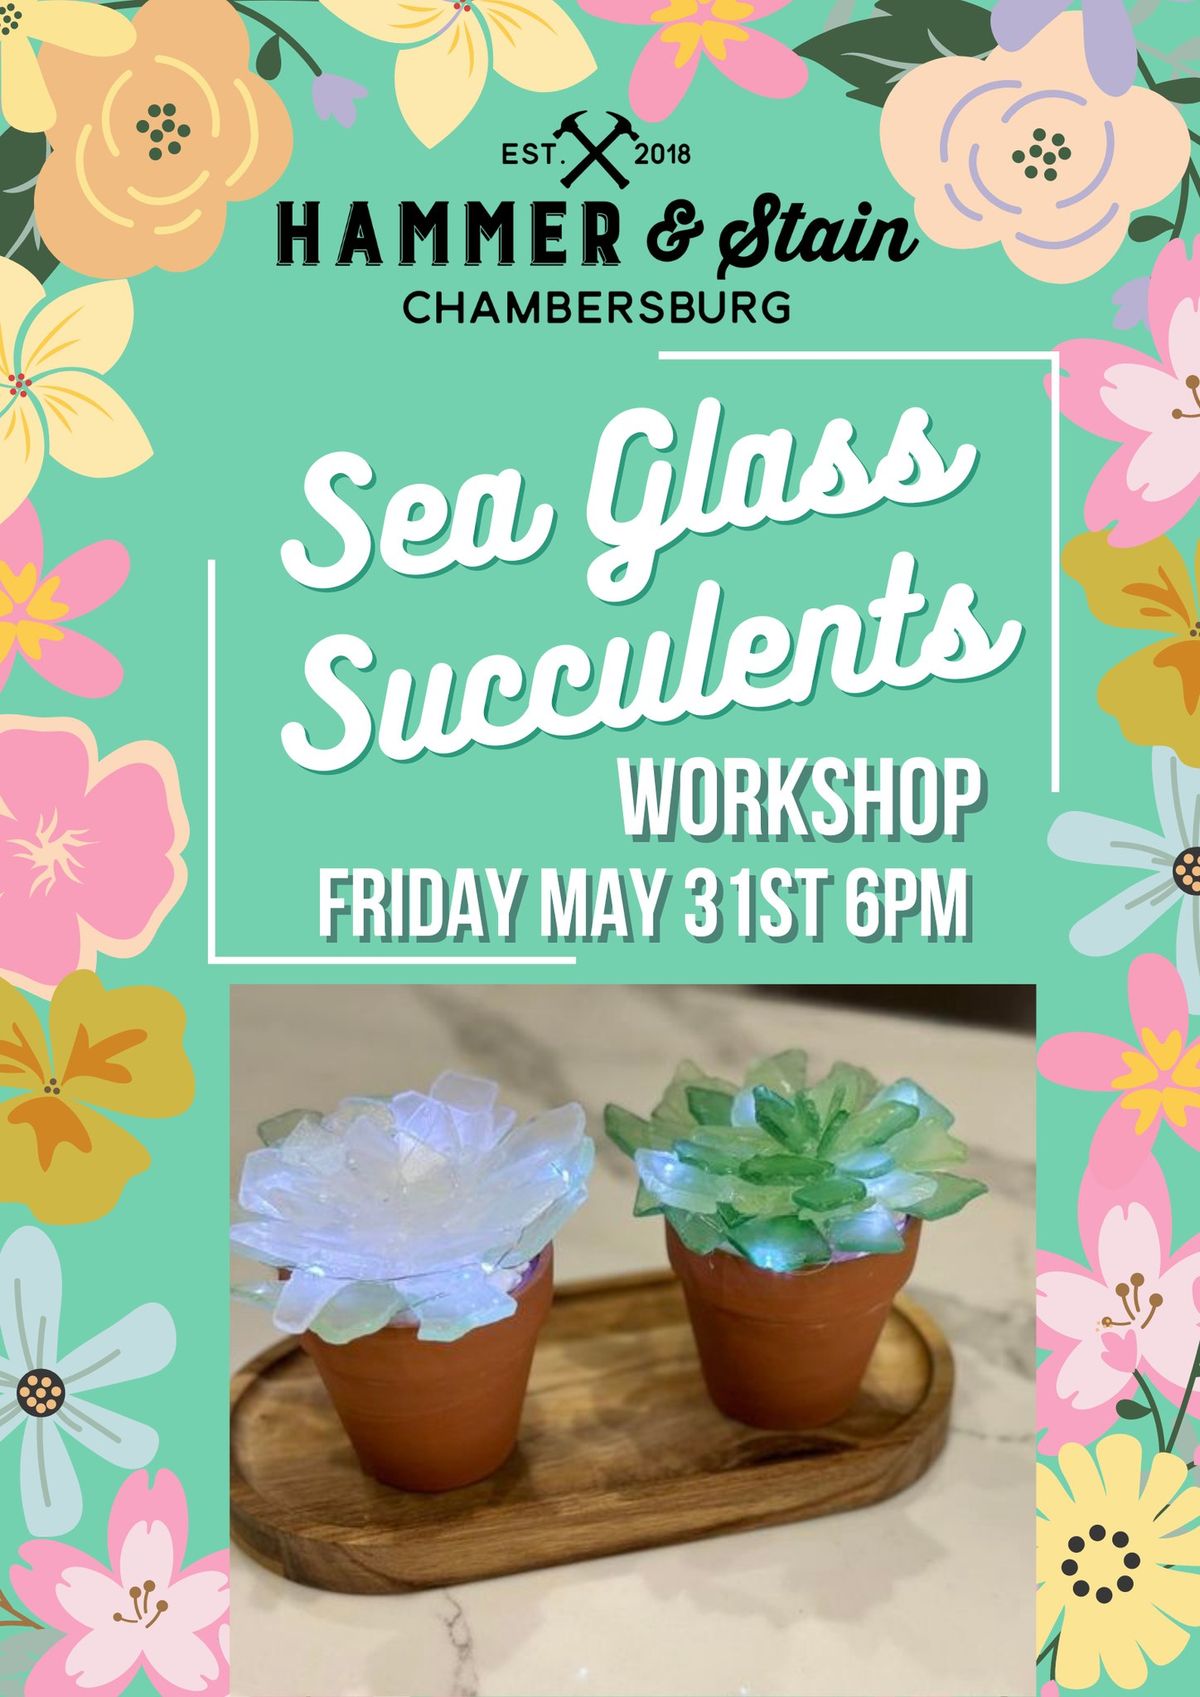 Friday May 31st- Sea Glass Succulents Workshop 6pm